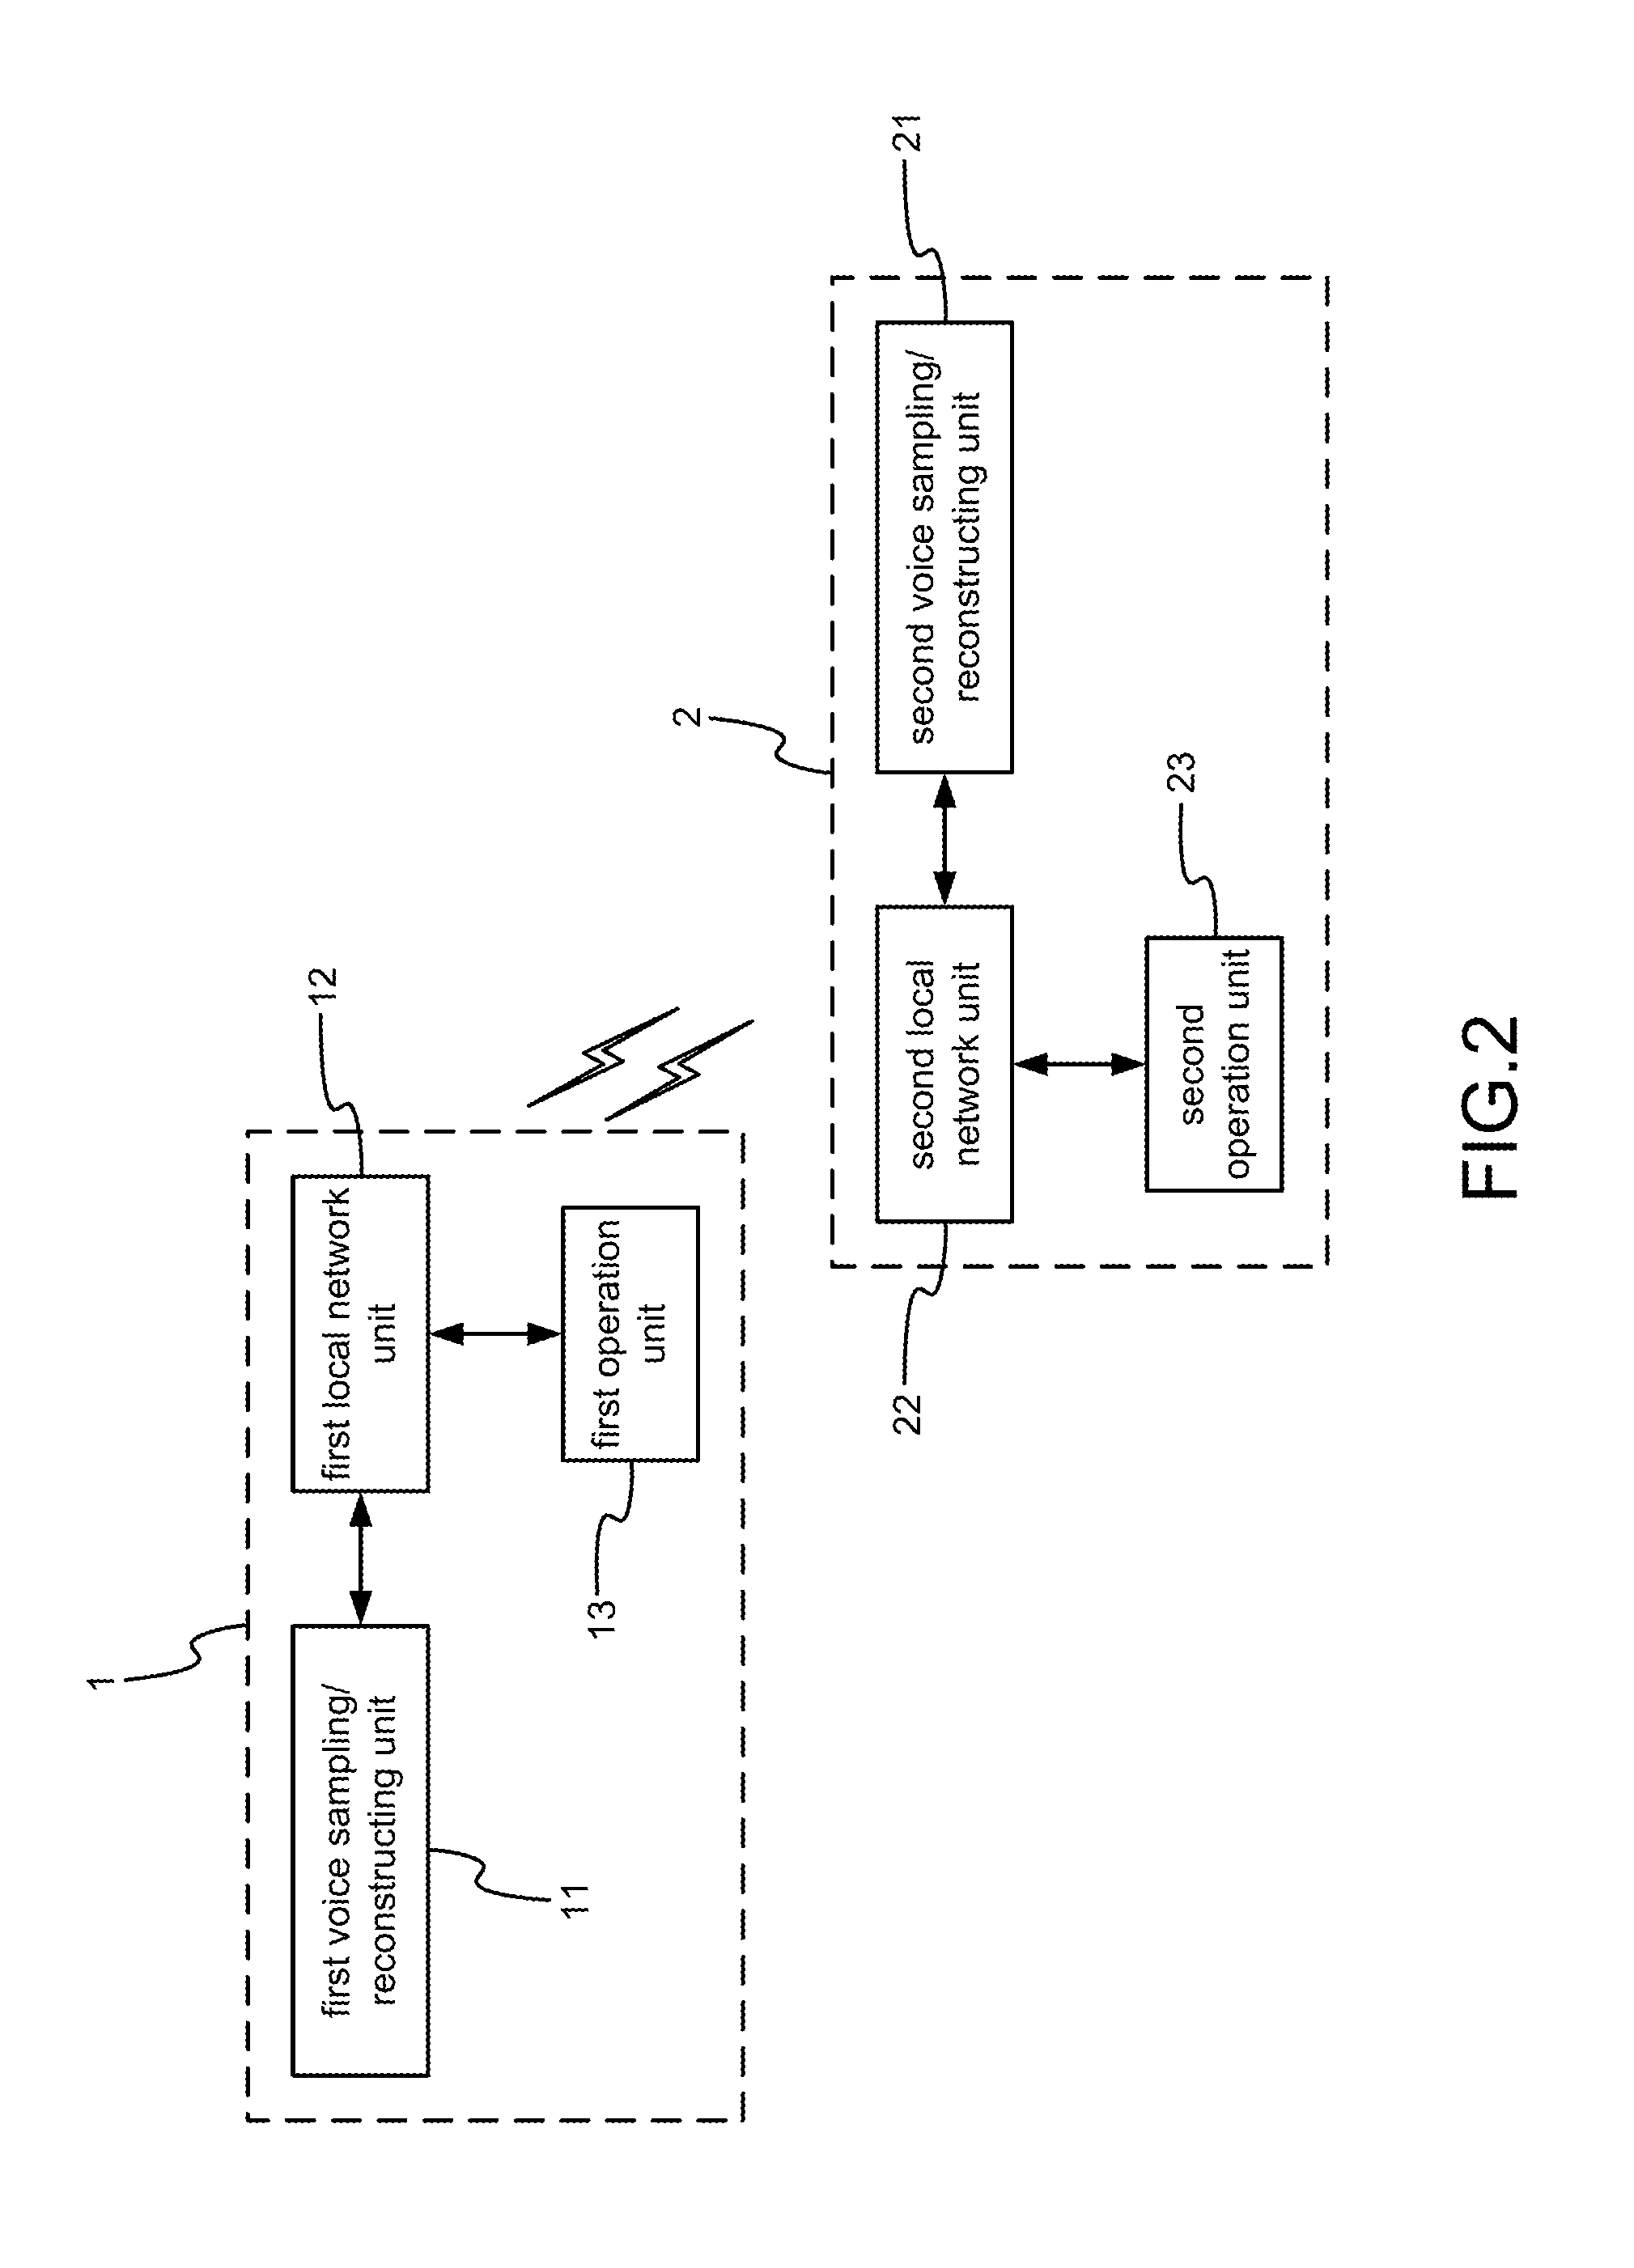 Full-Duplex Wireless Voice Broadcasting Apparatus with Channel-Changing and Interference-Resistance